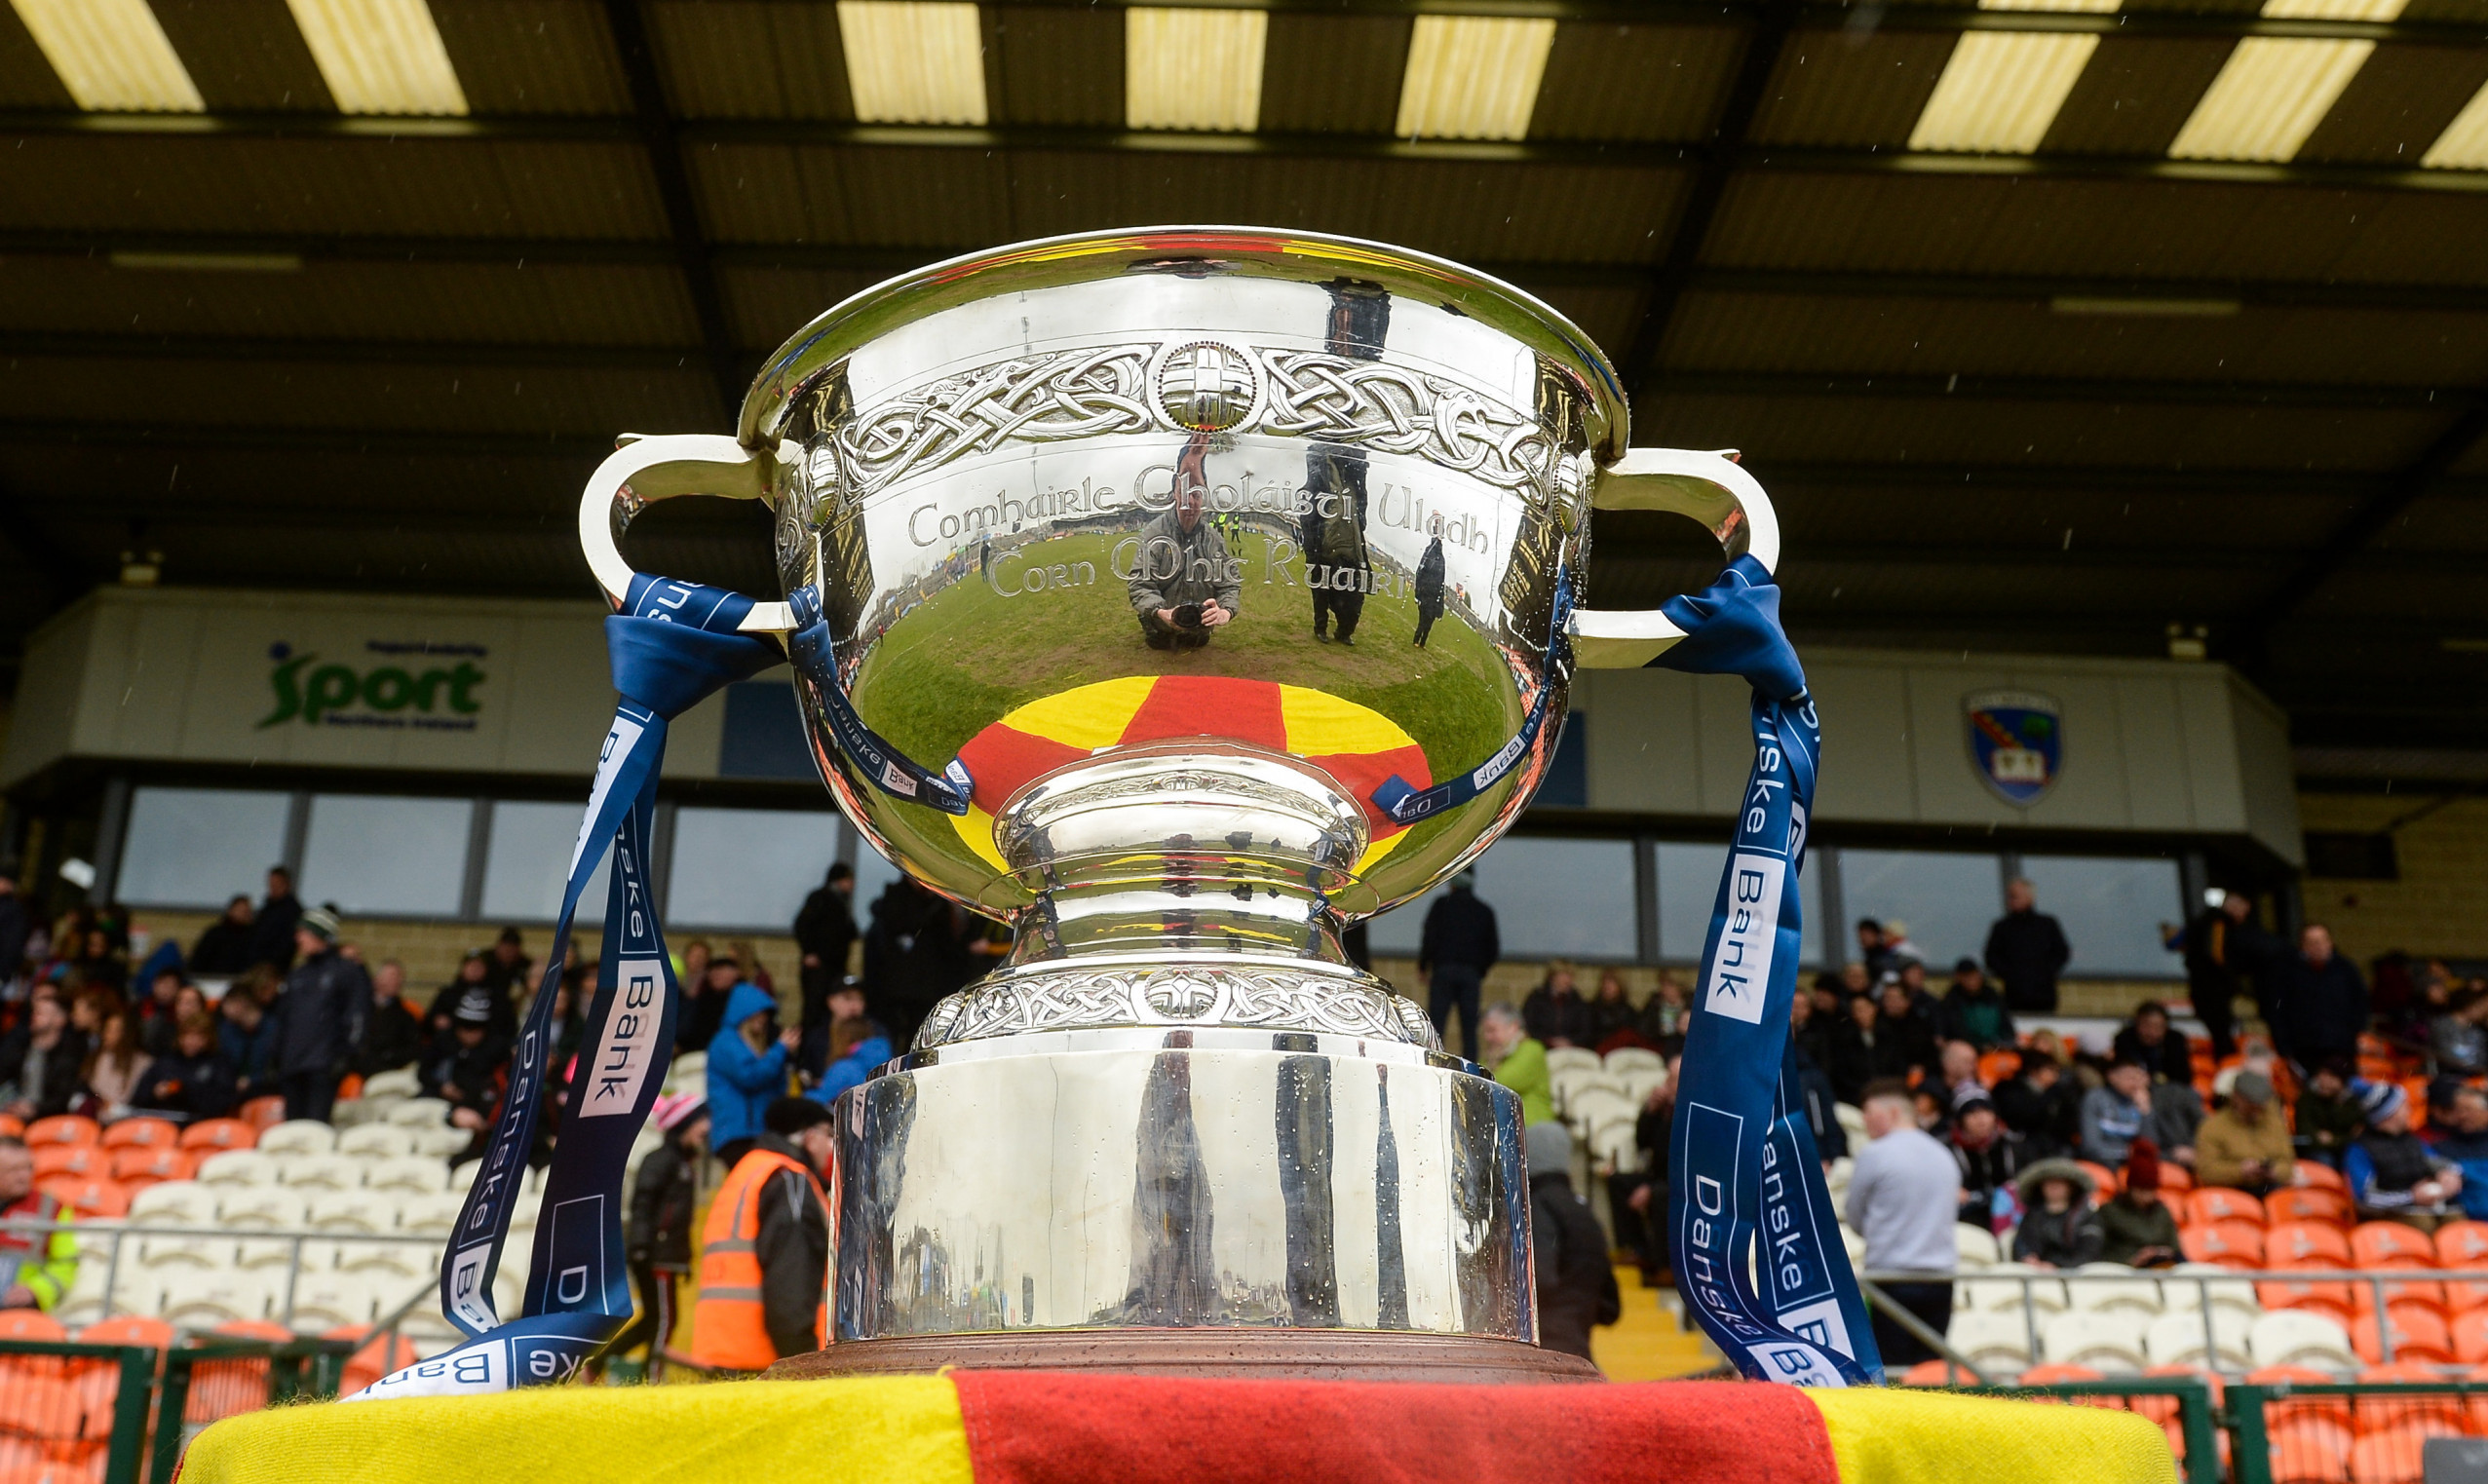 2019/20 Danske Bank MacRory and MacLarnon Cup Finals to be cancelled